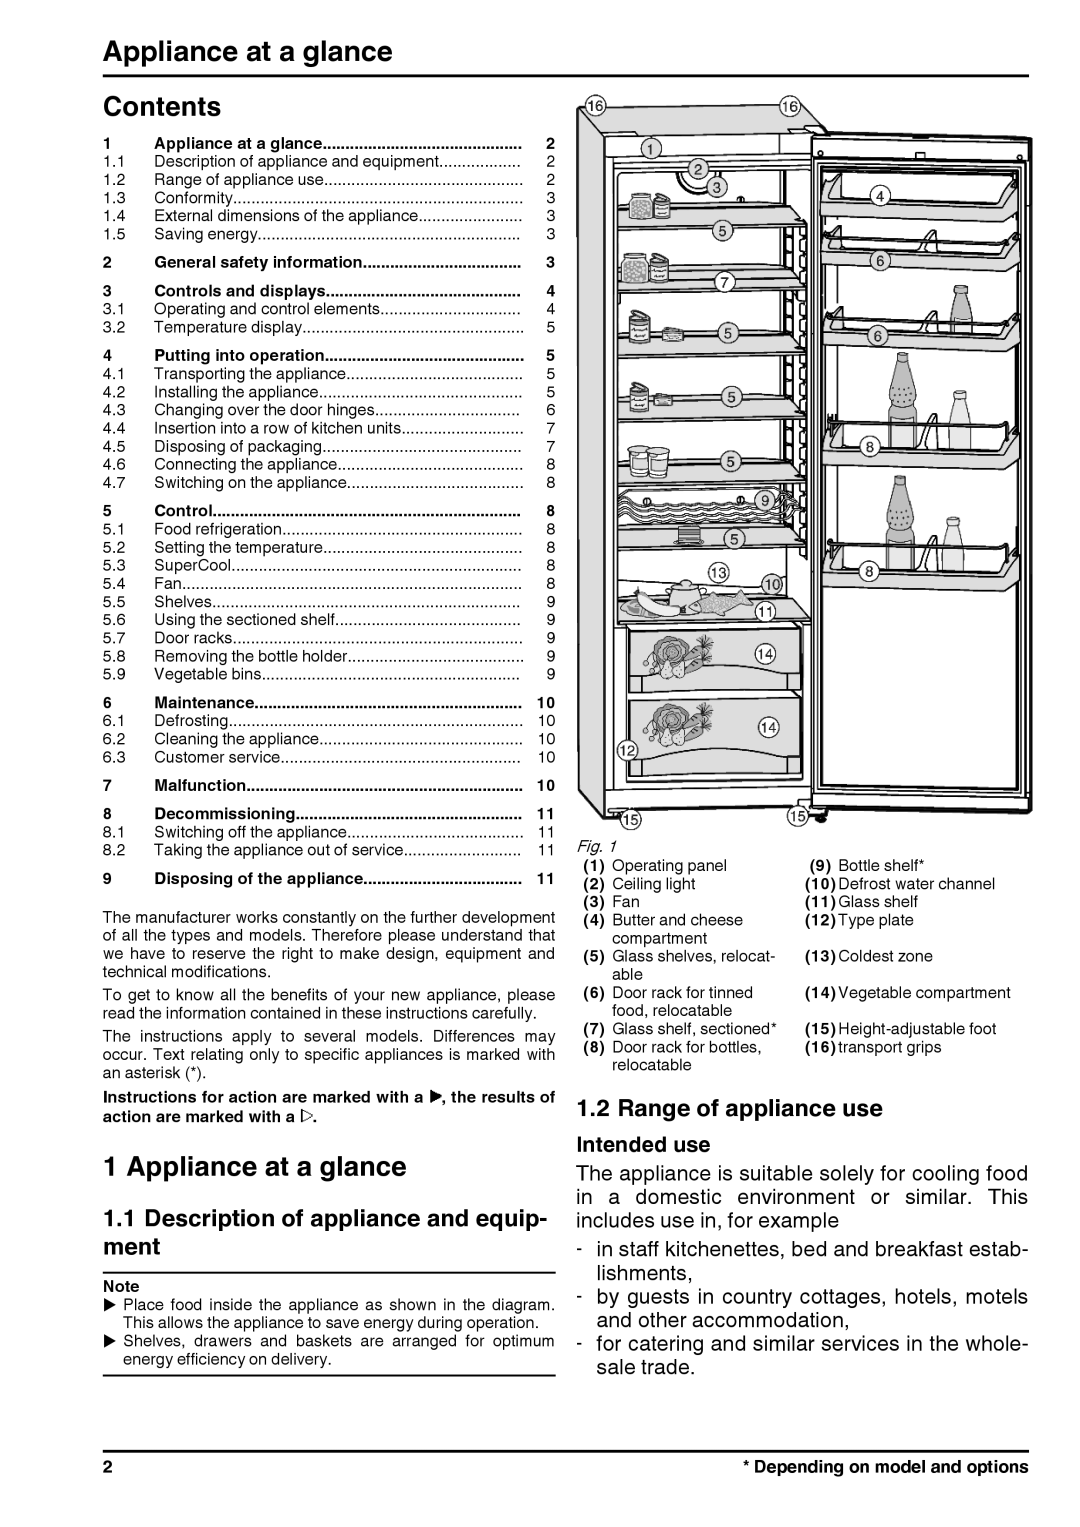 Liebherr 7085638-01 Appliance at a glance, Contents, Description of appliance and equip- ment, Range of appliance use 